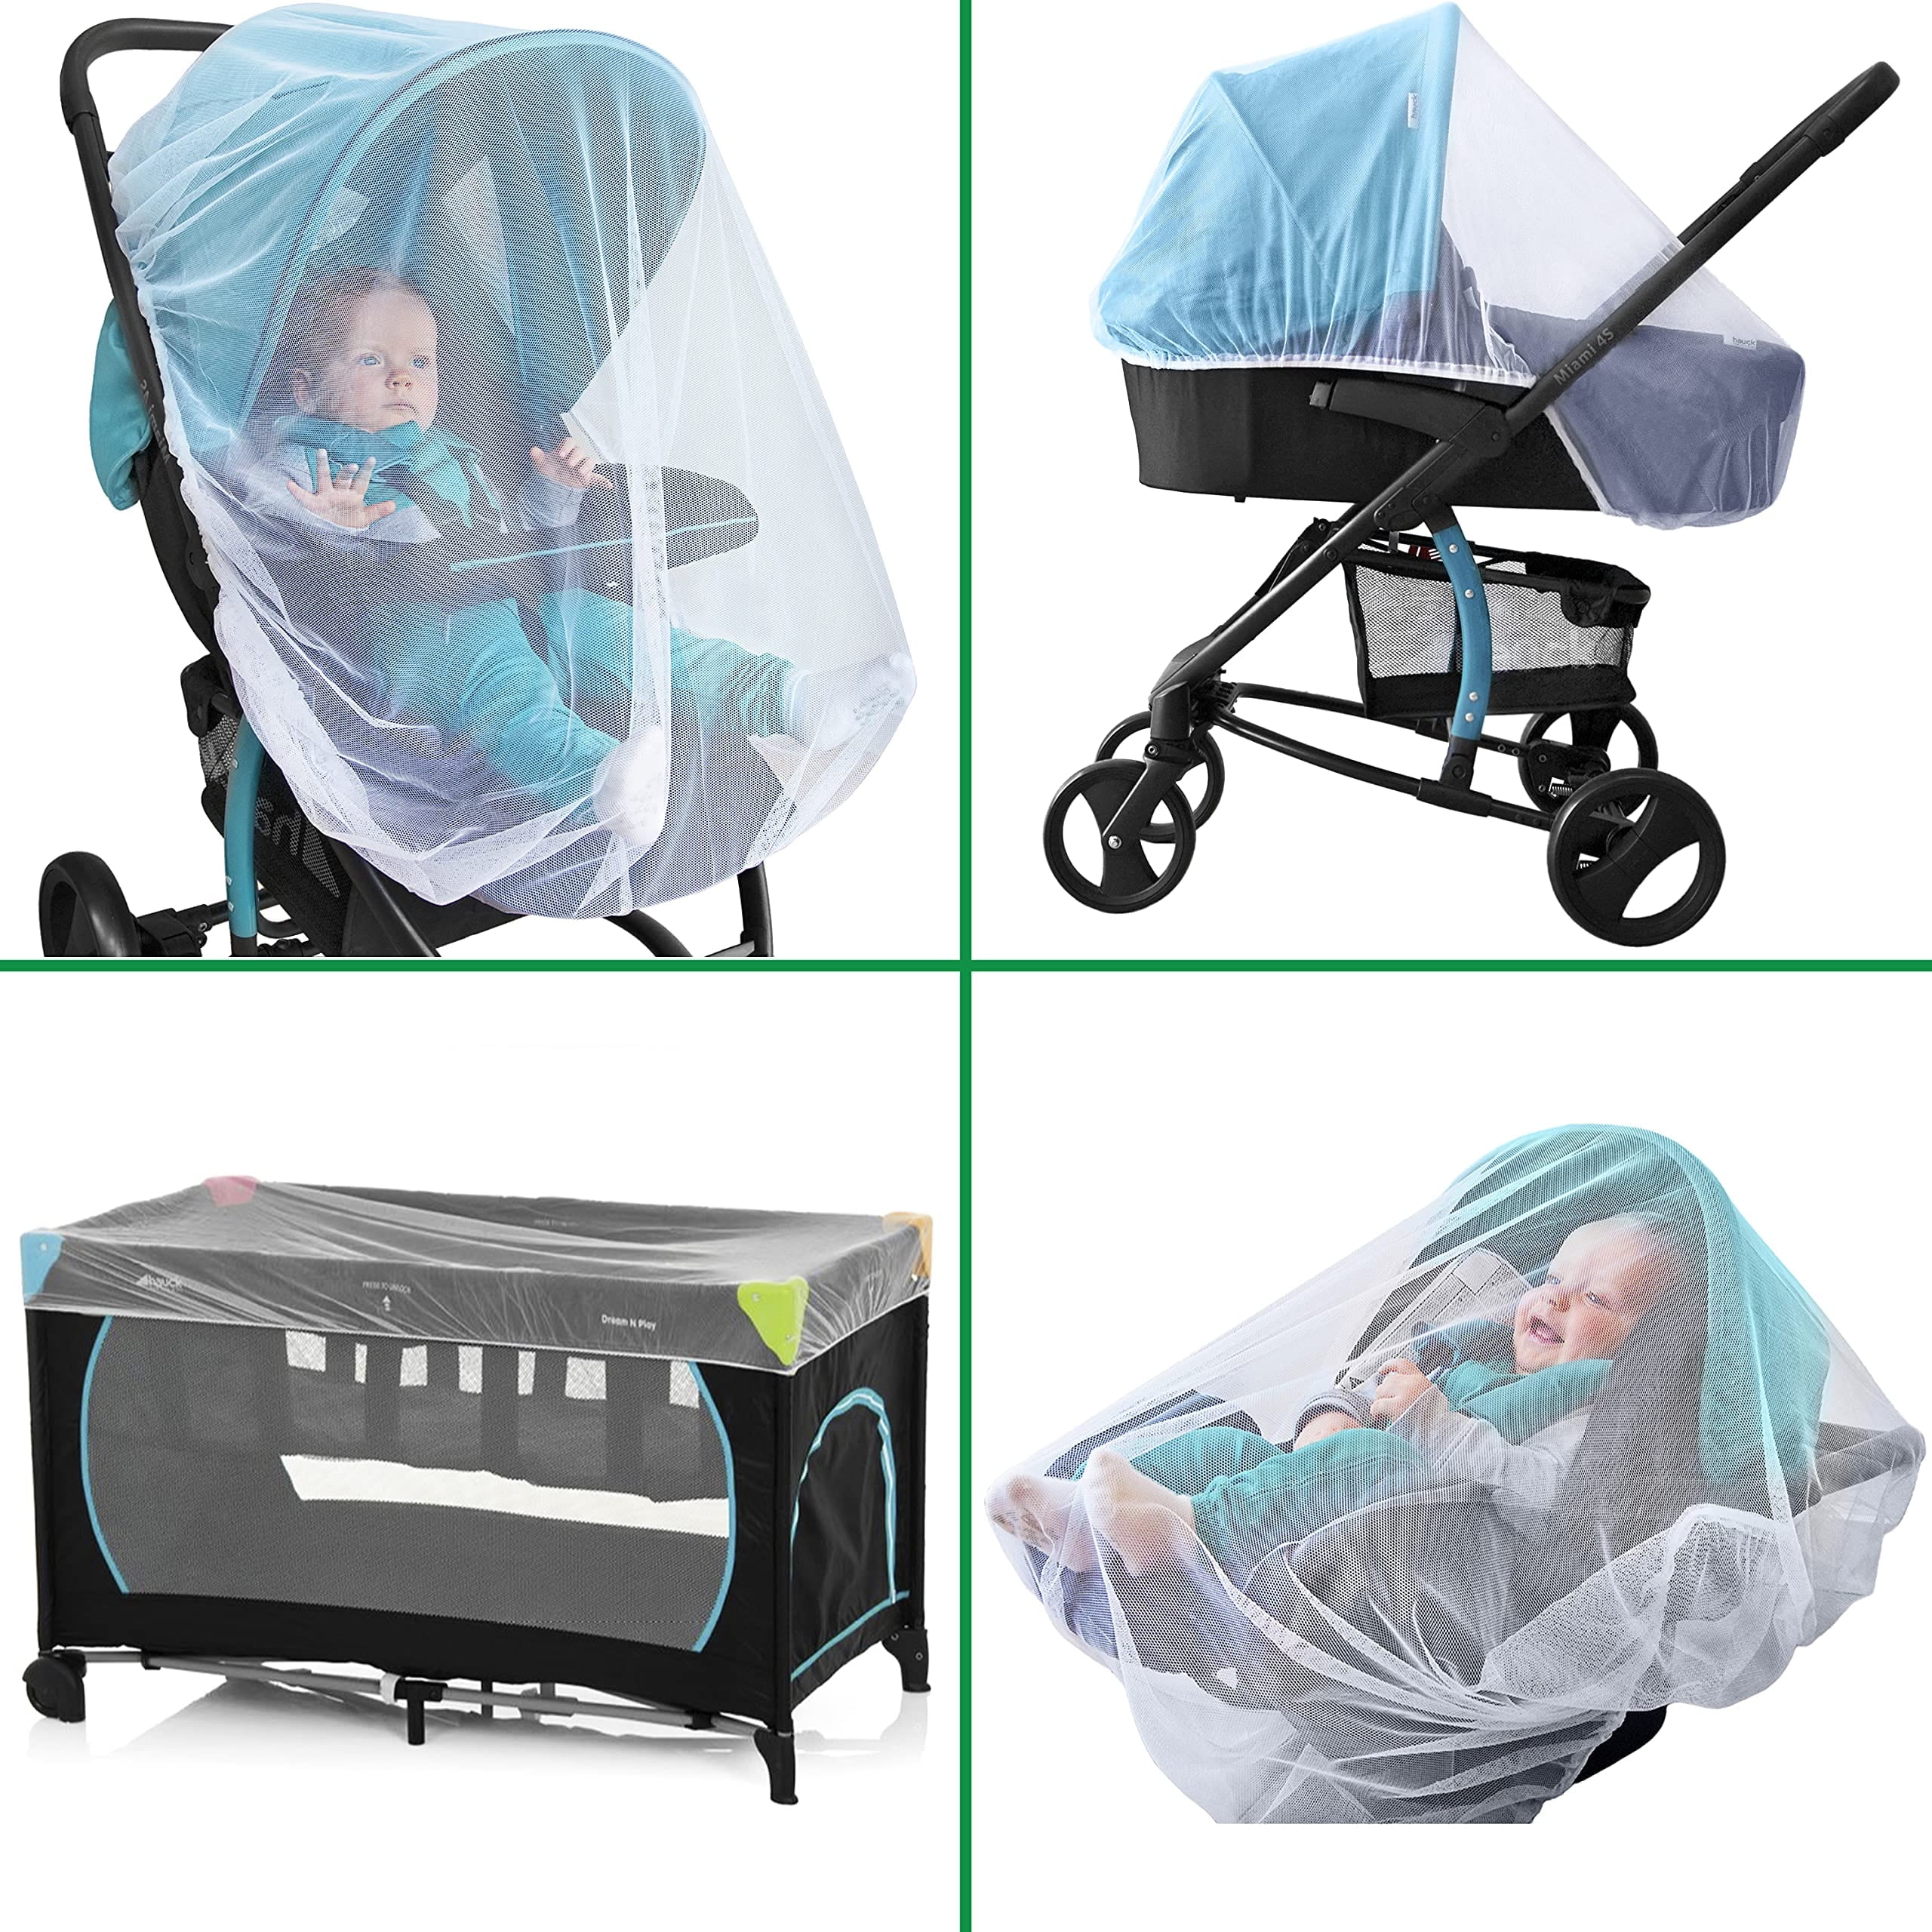 Mosquito Net for Stroller - Durable Baby Stroller Mosquito Net - Perfect  Bug Net for Strollers, Bassinets, Cradles, Playards, Pack N Plays and